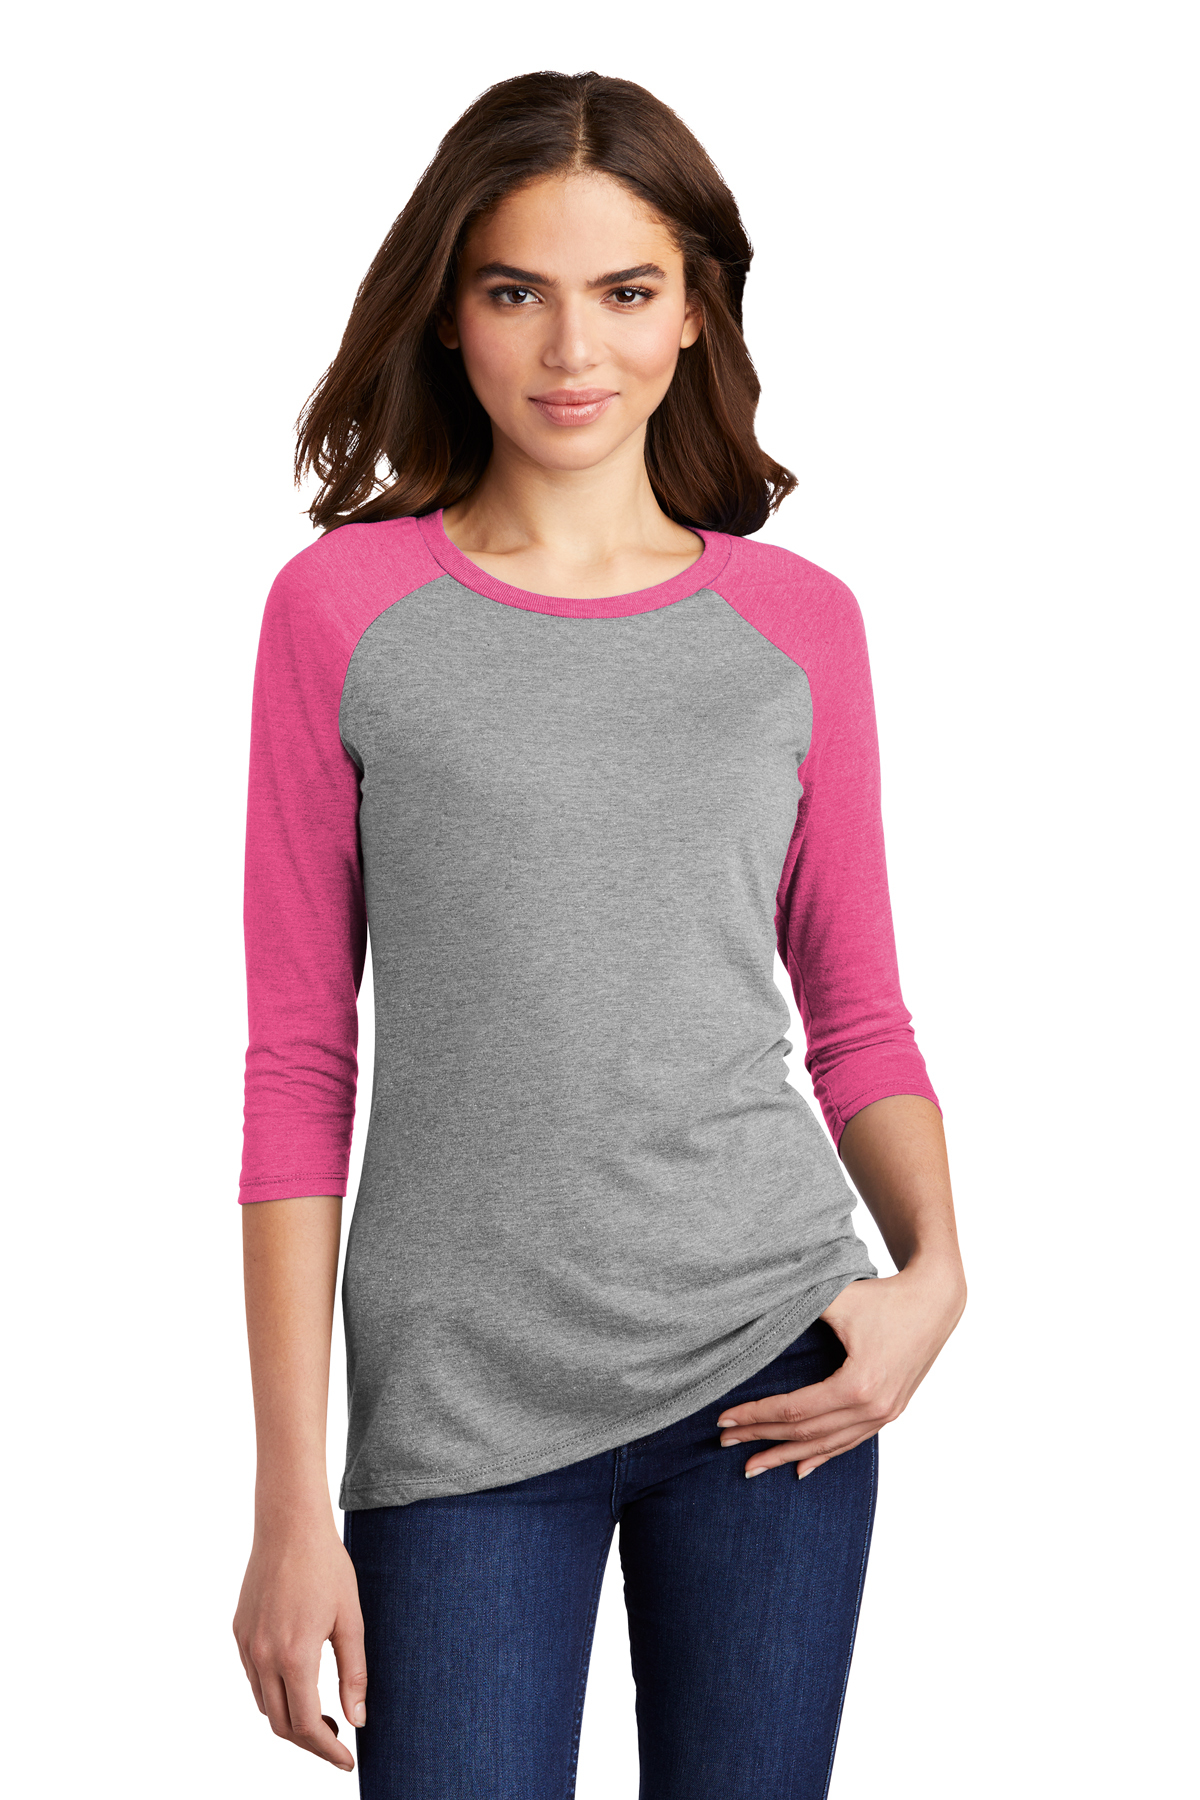 District Women’s Perfect Tri 3/4-Sleeve Raglan | Product | Company Casuals